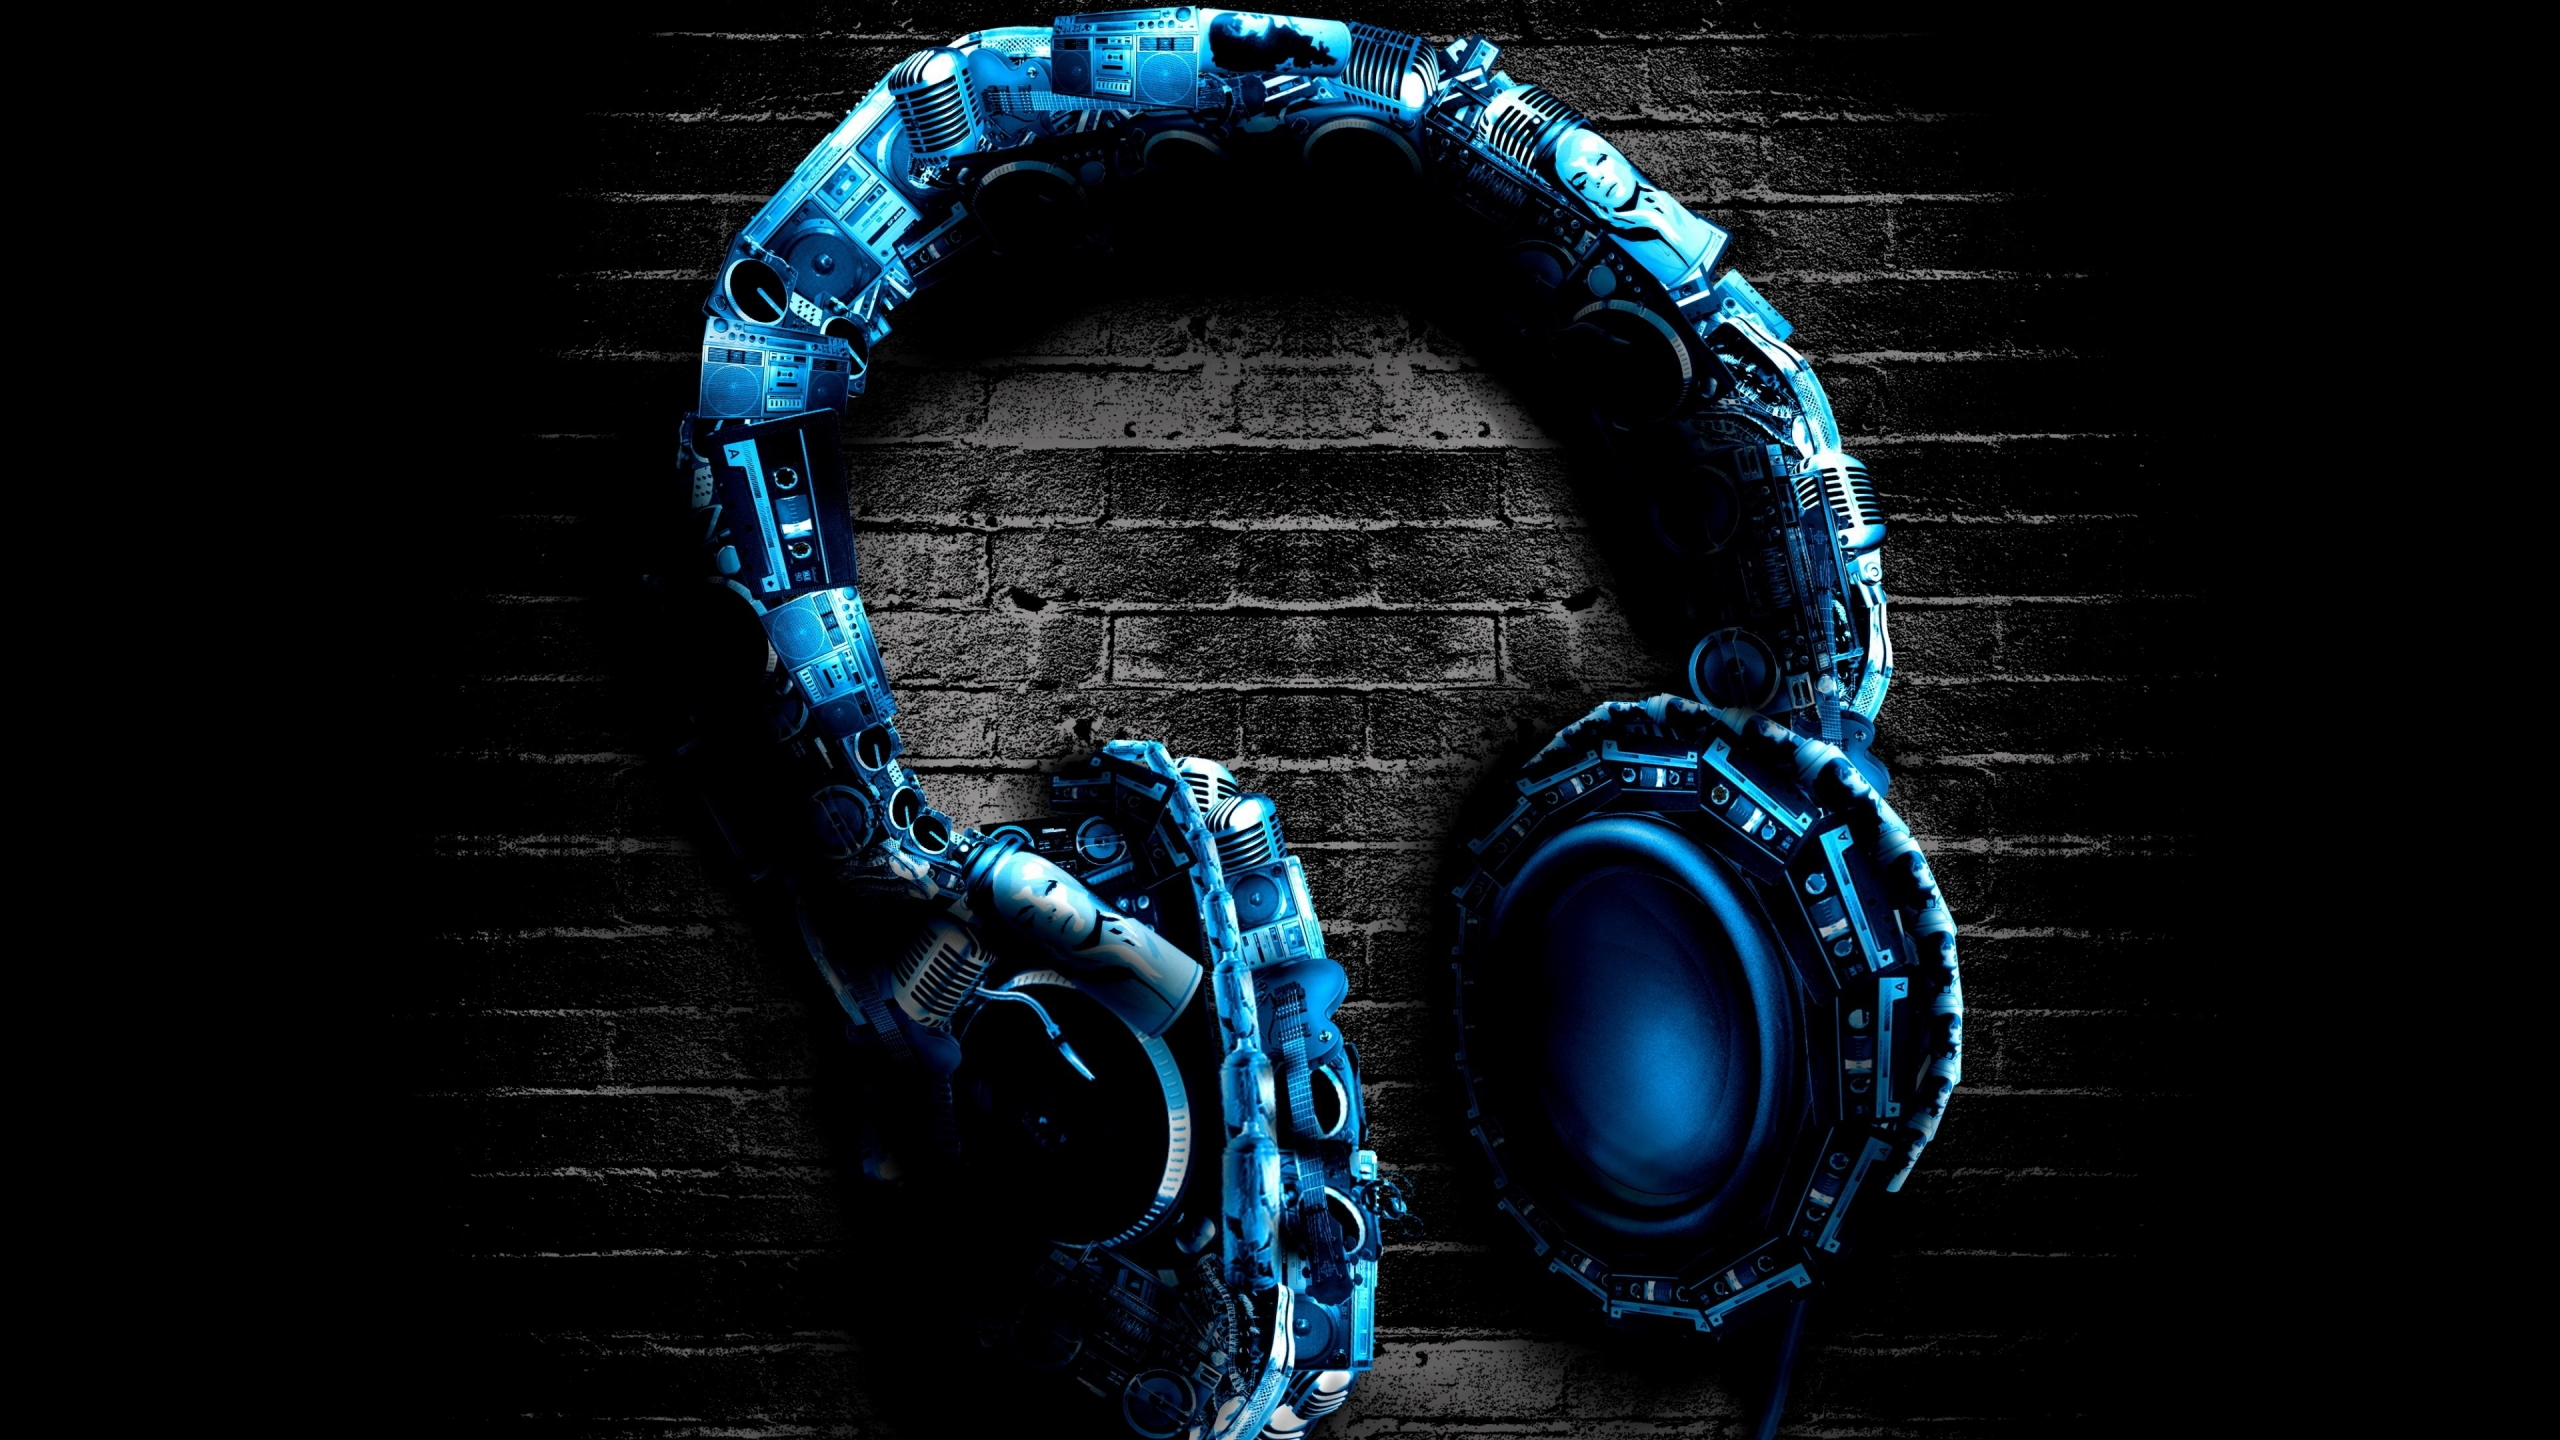 Abstract Headphones for 2560x1440 HDTV resolution